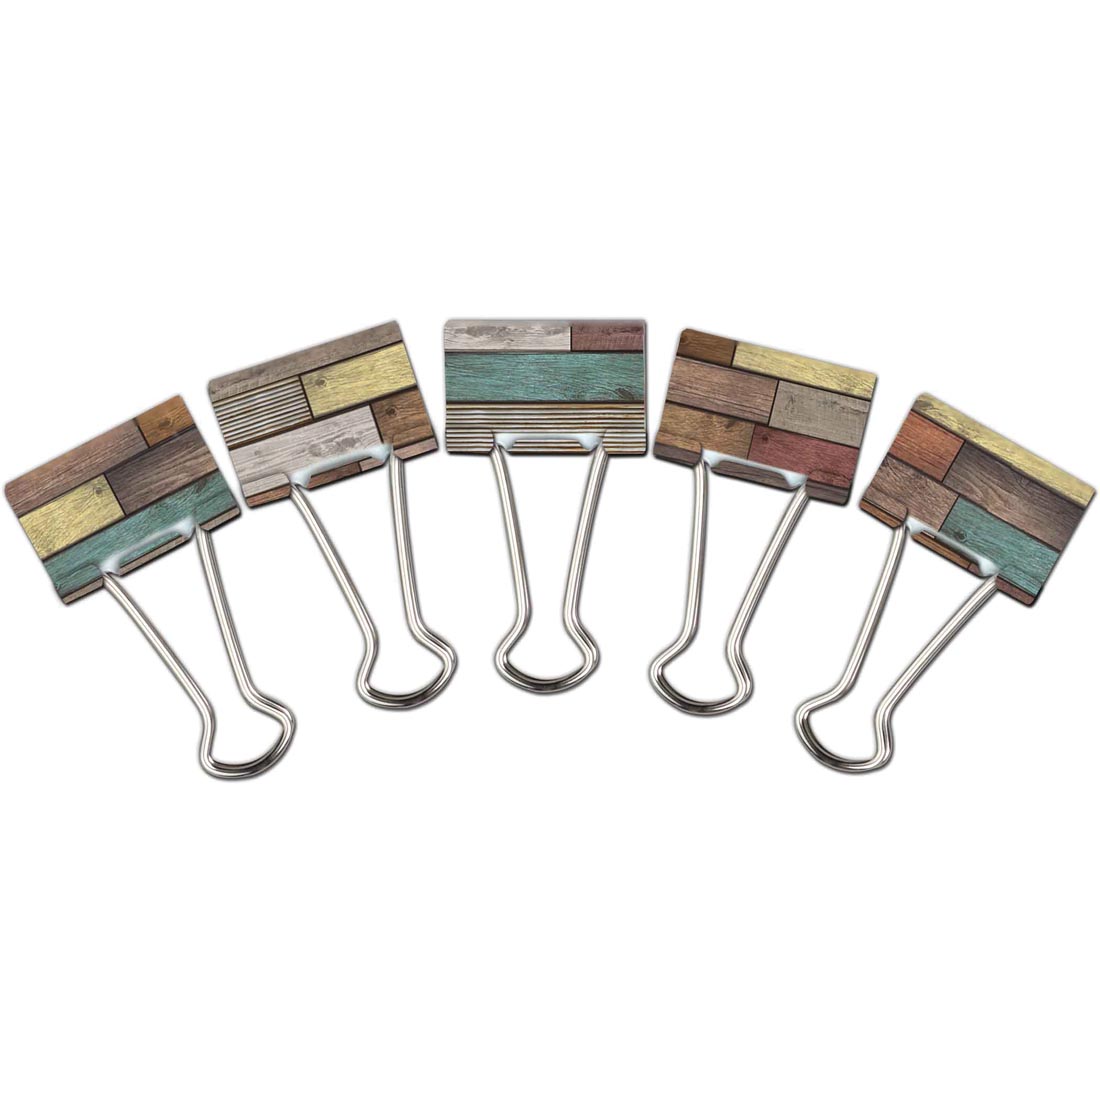 Set of five Binder Clips decorated to look like reclaimed wood from the Home Sweet Classroom collection